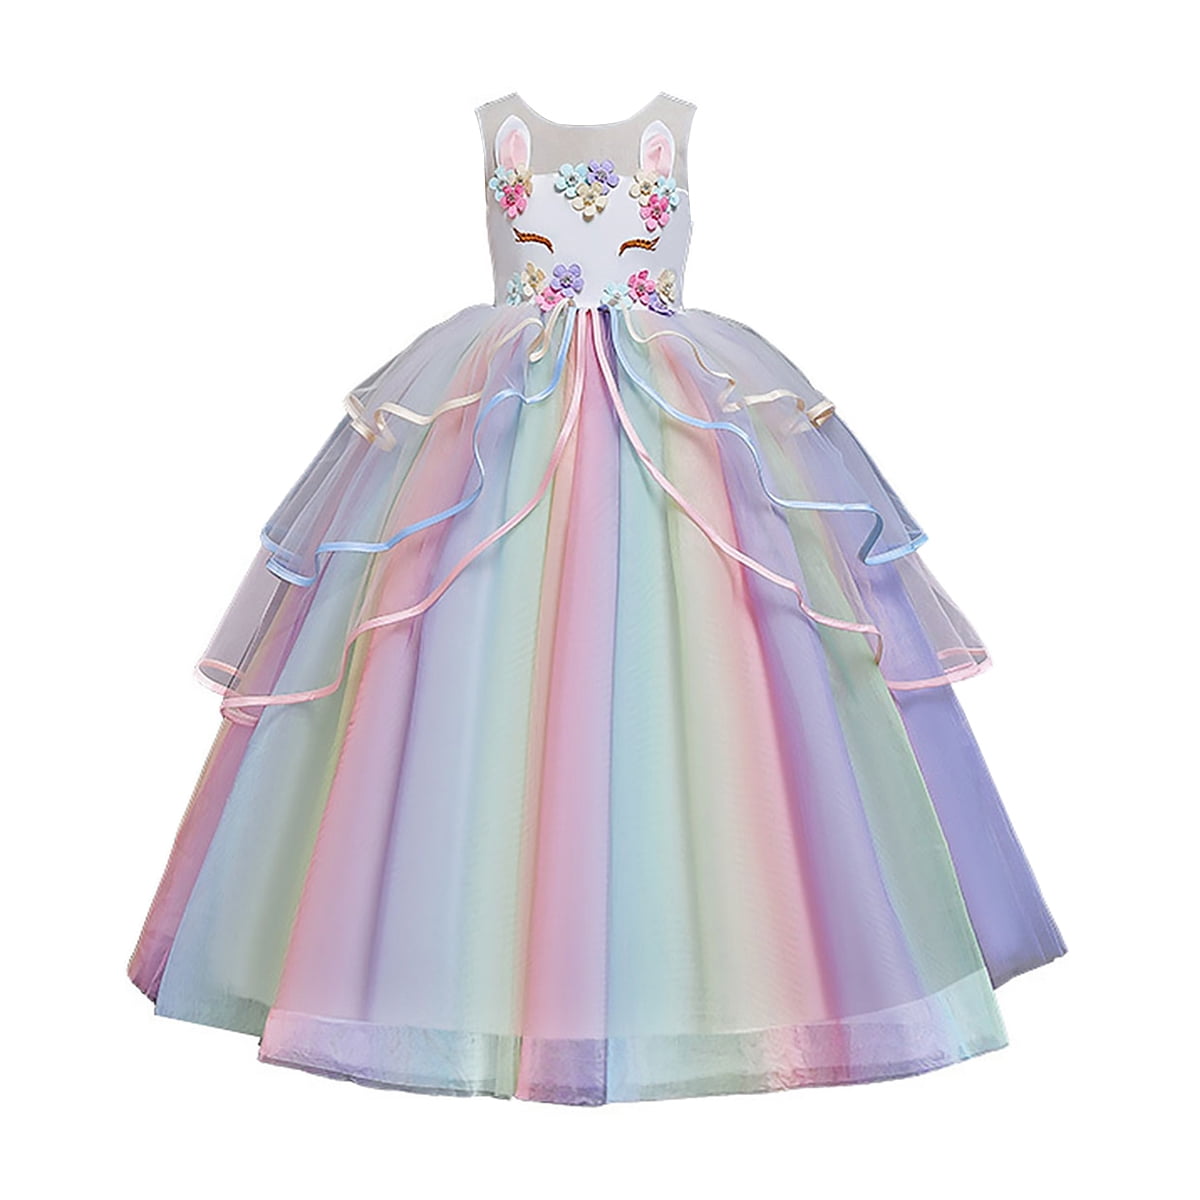 Kids Girls Unicorn Costume Birthday Party Cosplay Fancy Dress Up Princess Outfit 